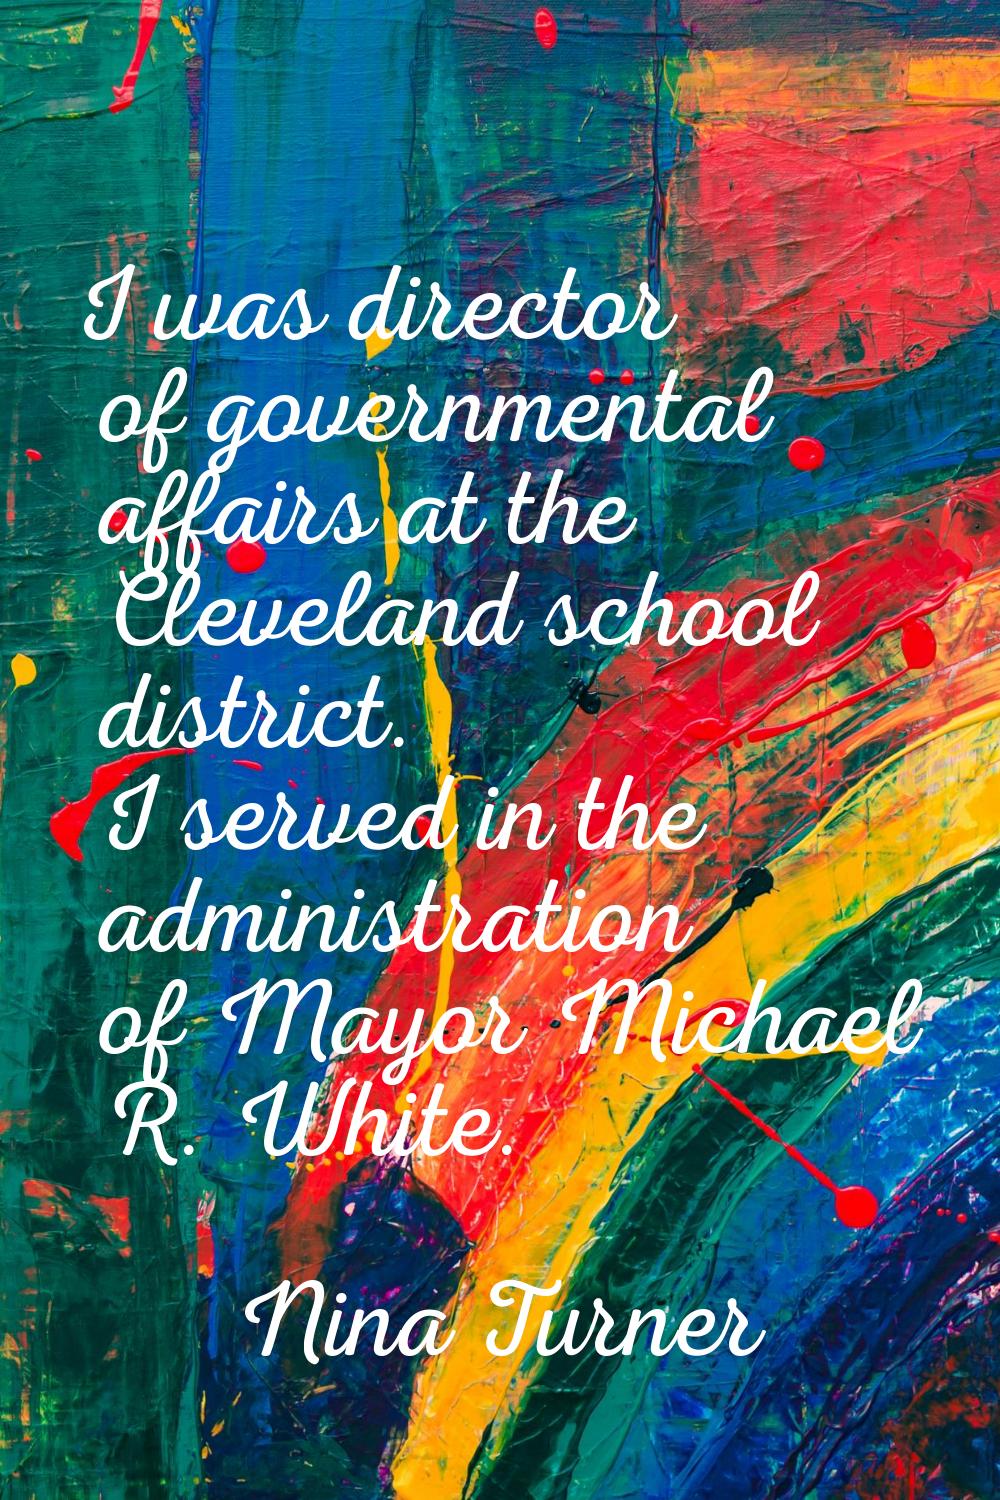 I was director of governmental affairs at the Cleveland school district. I served in the administra